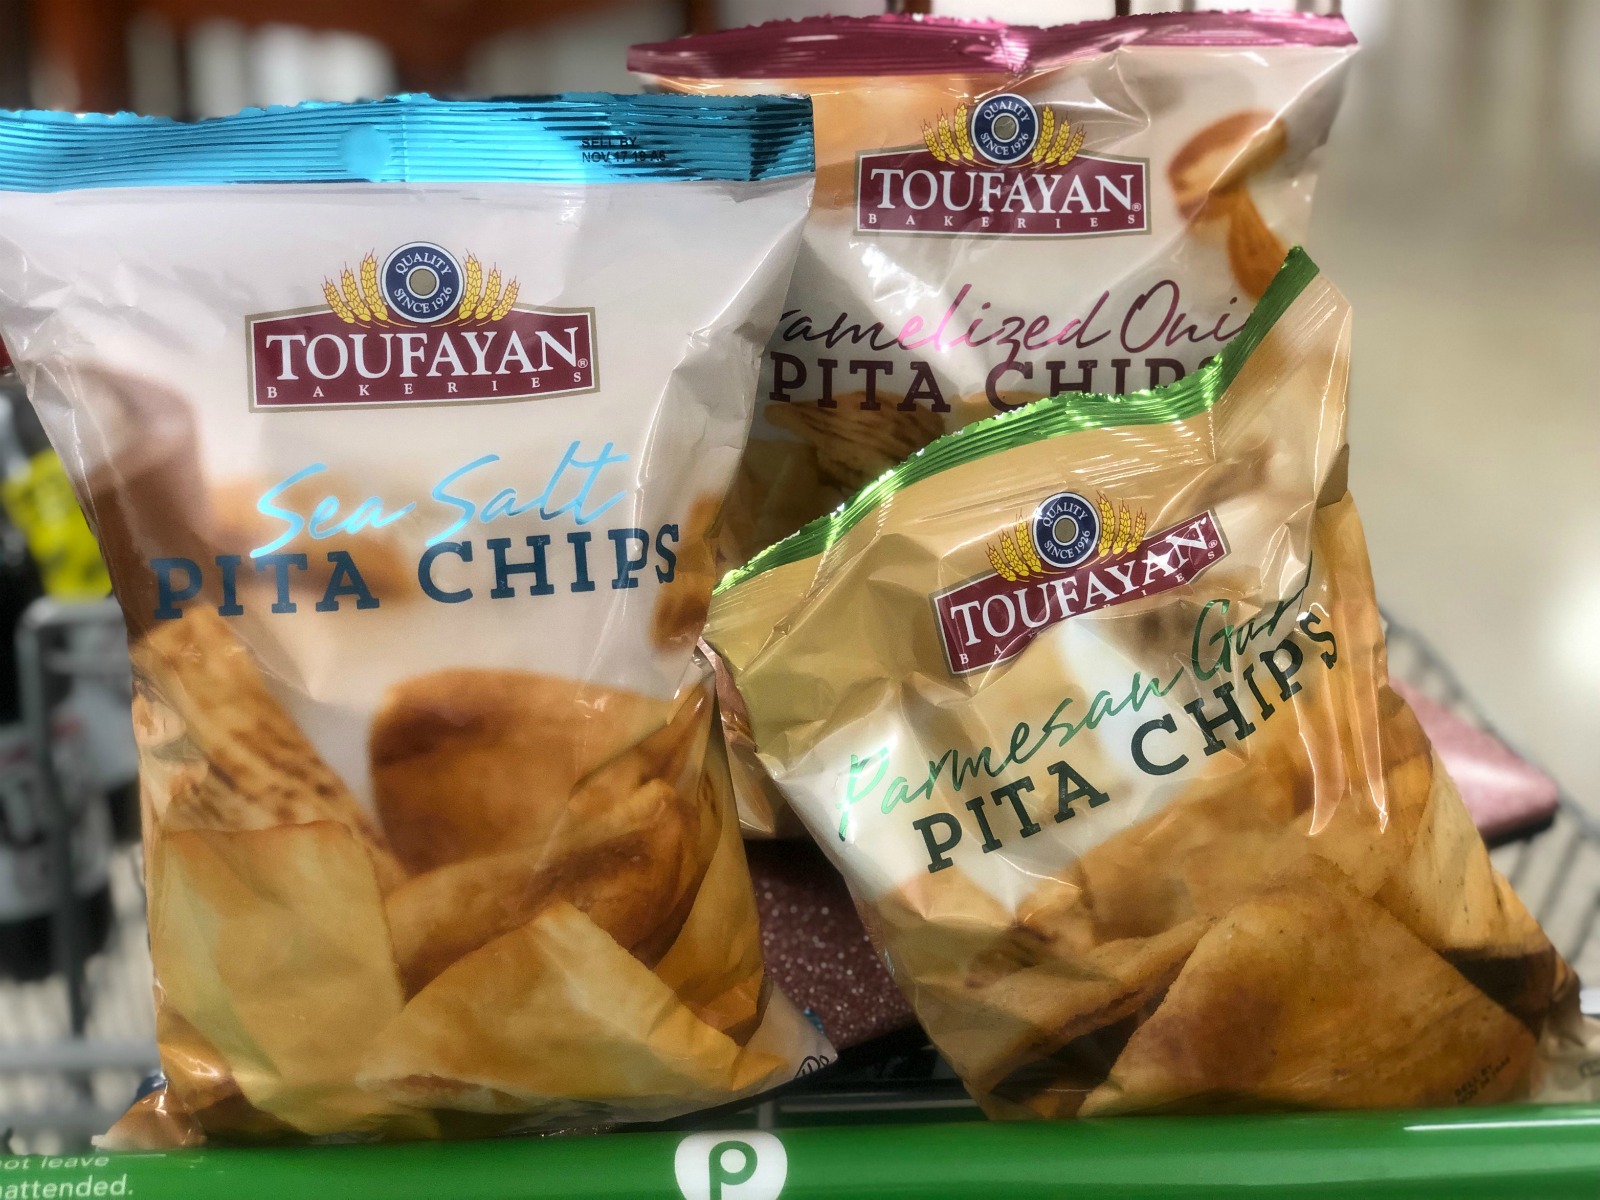 Toufayan Pita Chips Are Buy One, Get One FREE This Week At Publix!